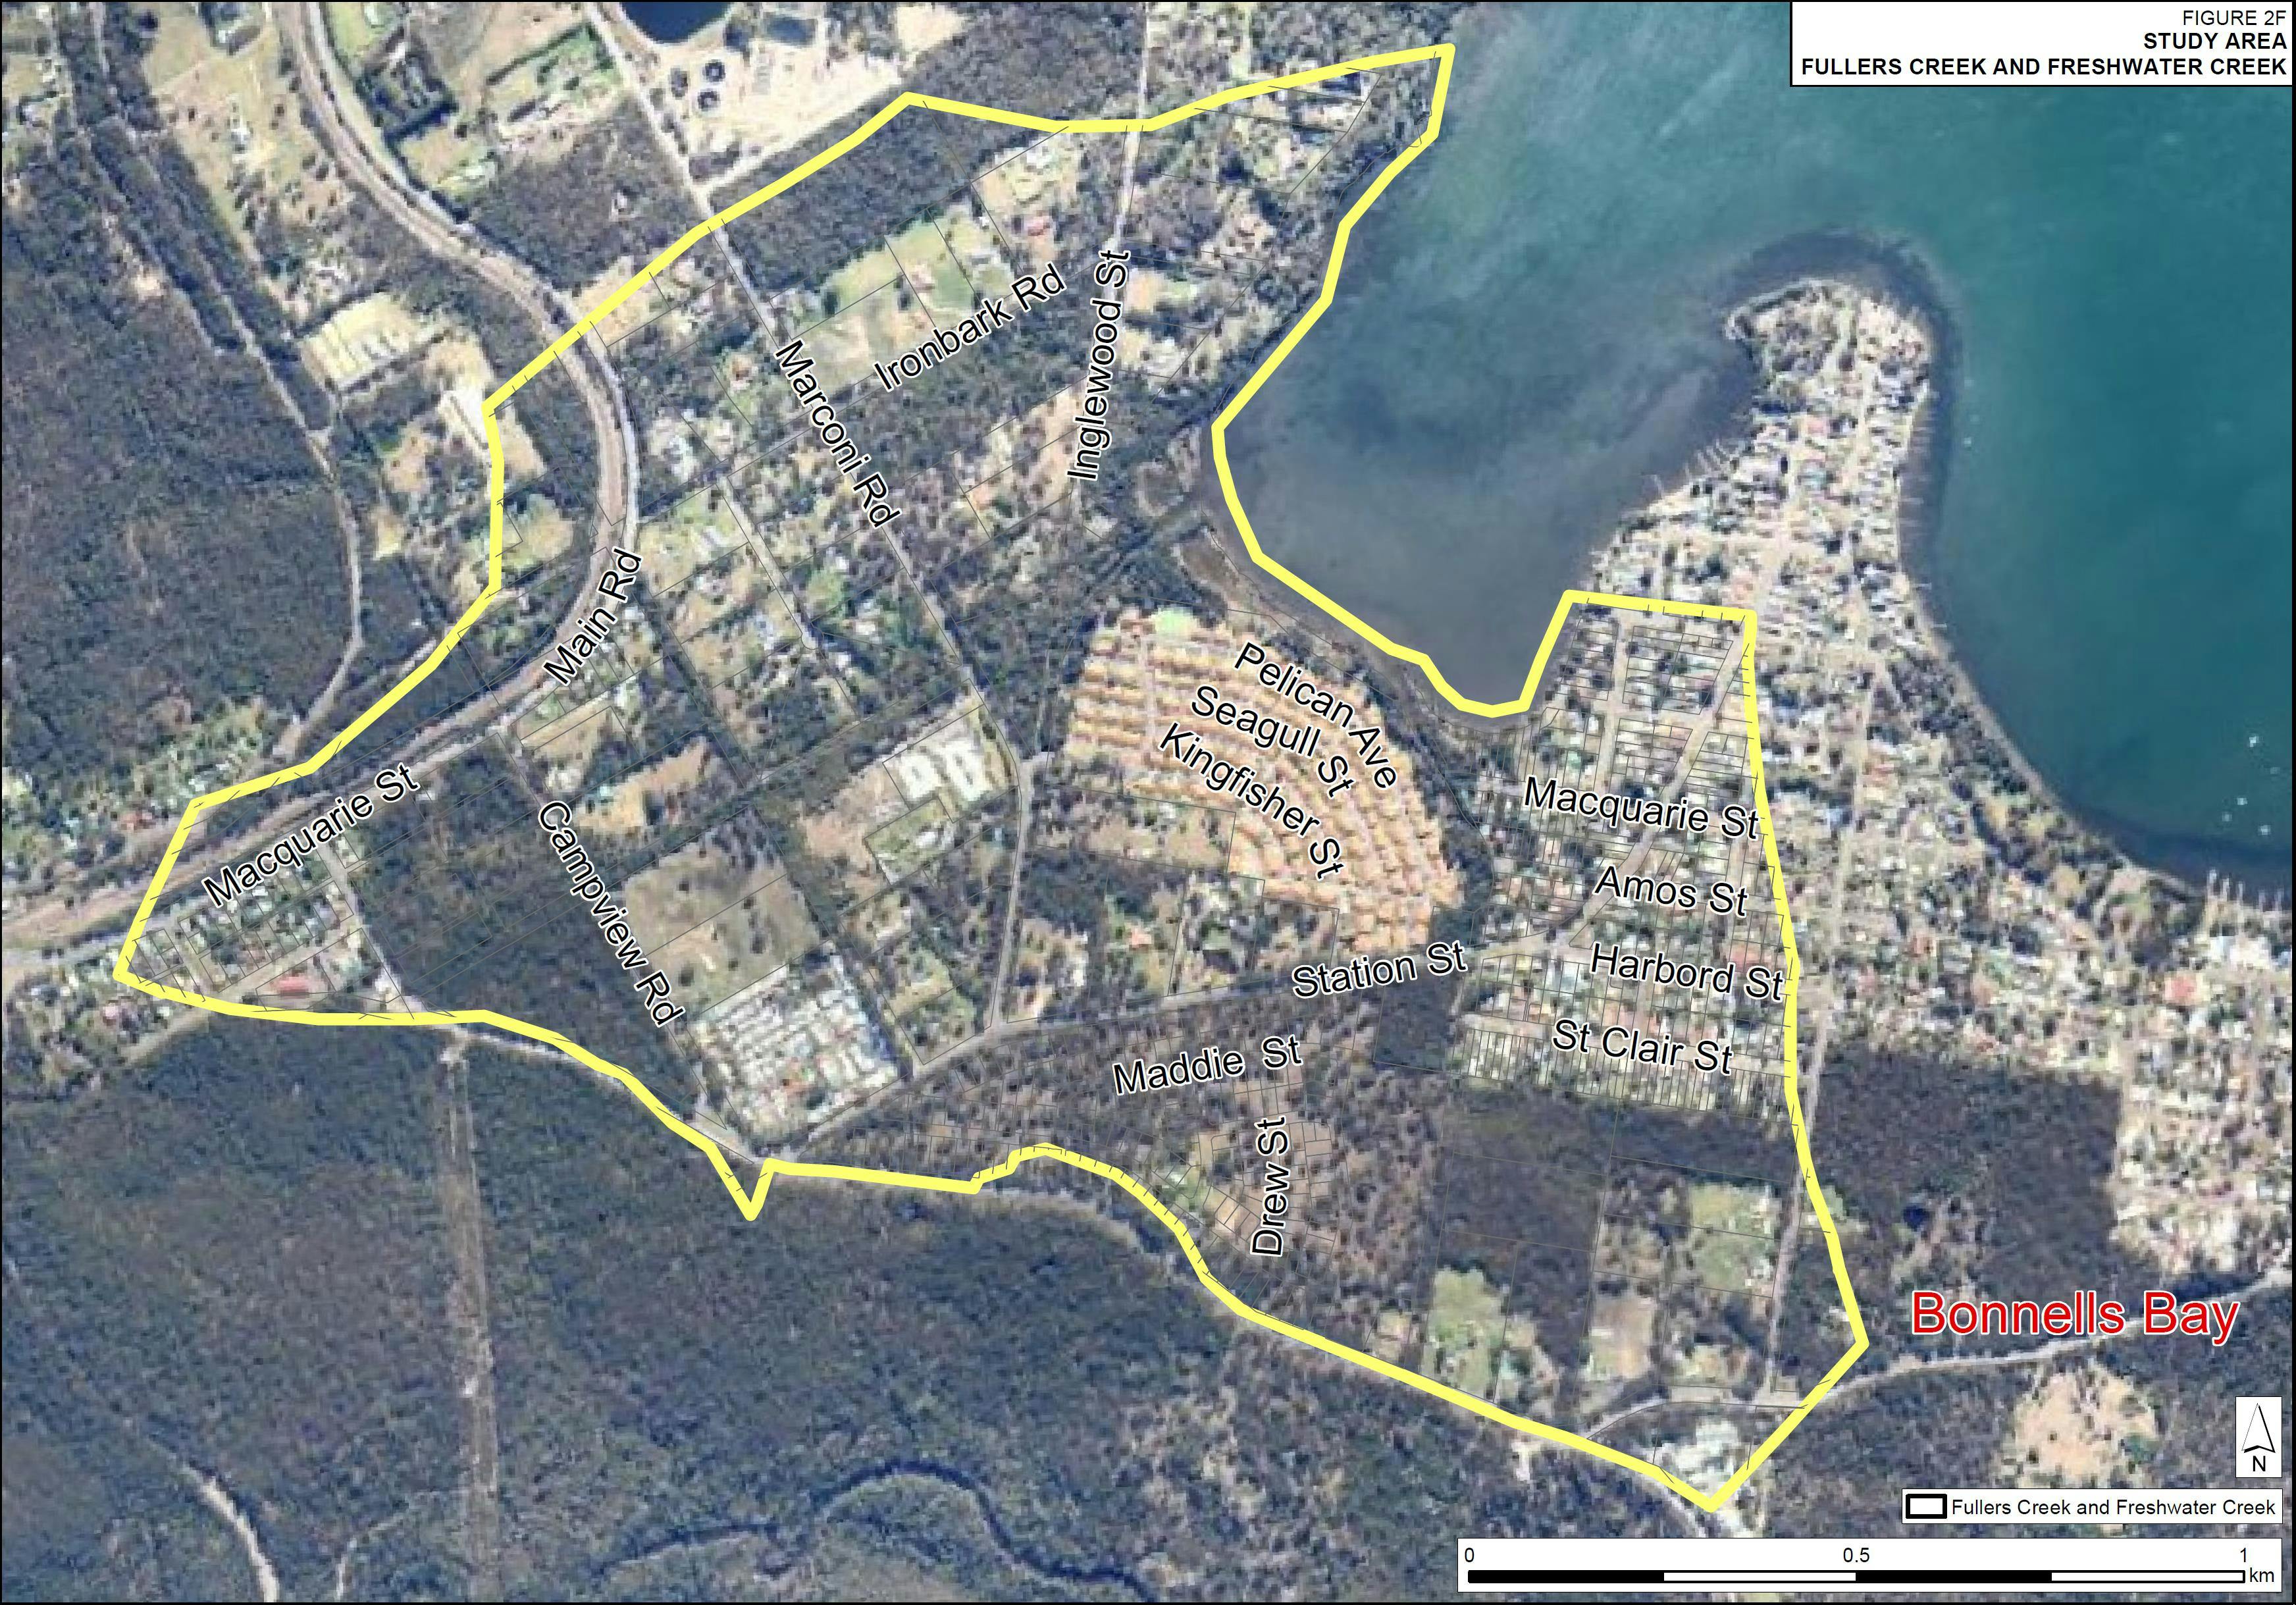 Fullers Creek and Freshwater Creek at Bonnells Bay  flood study catchment